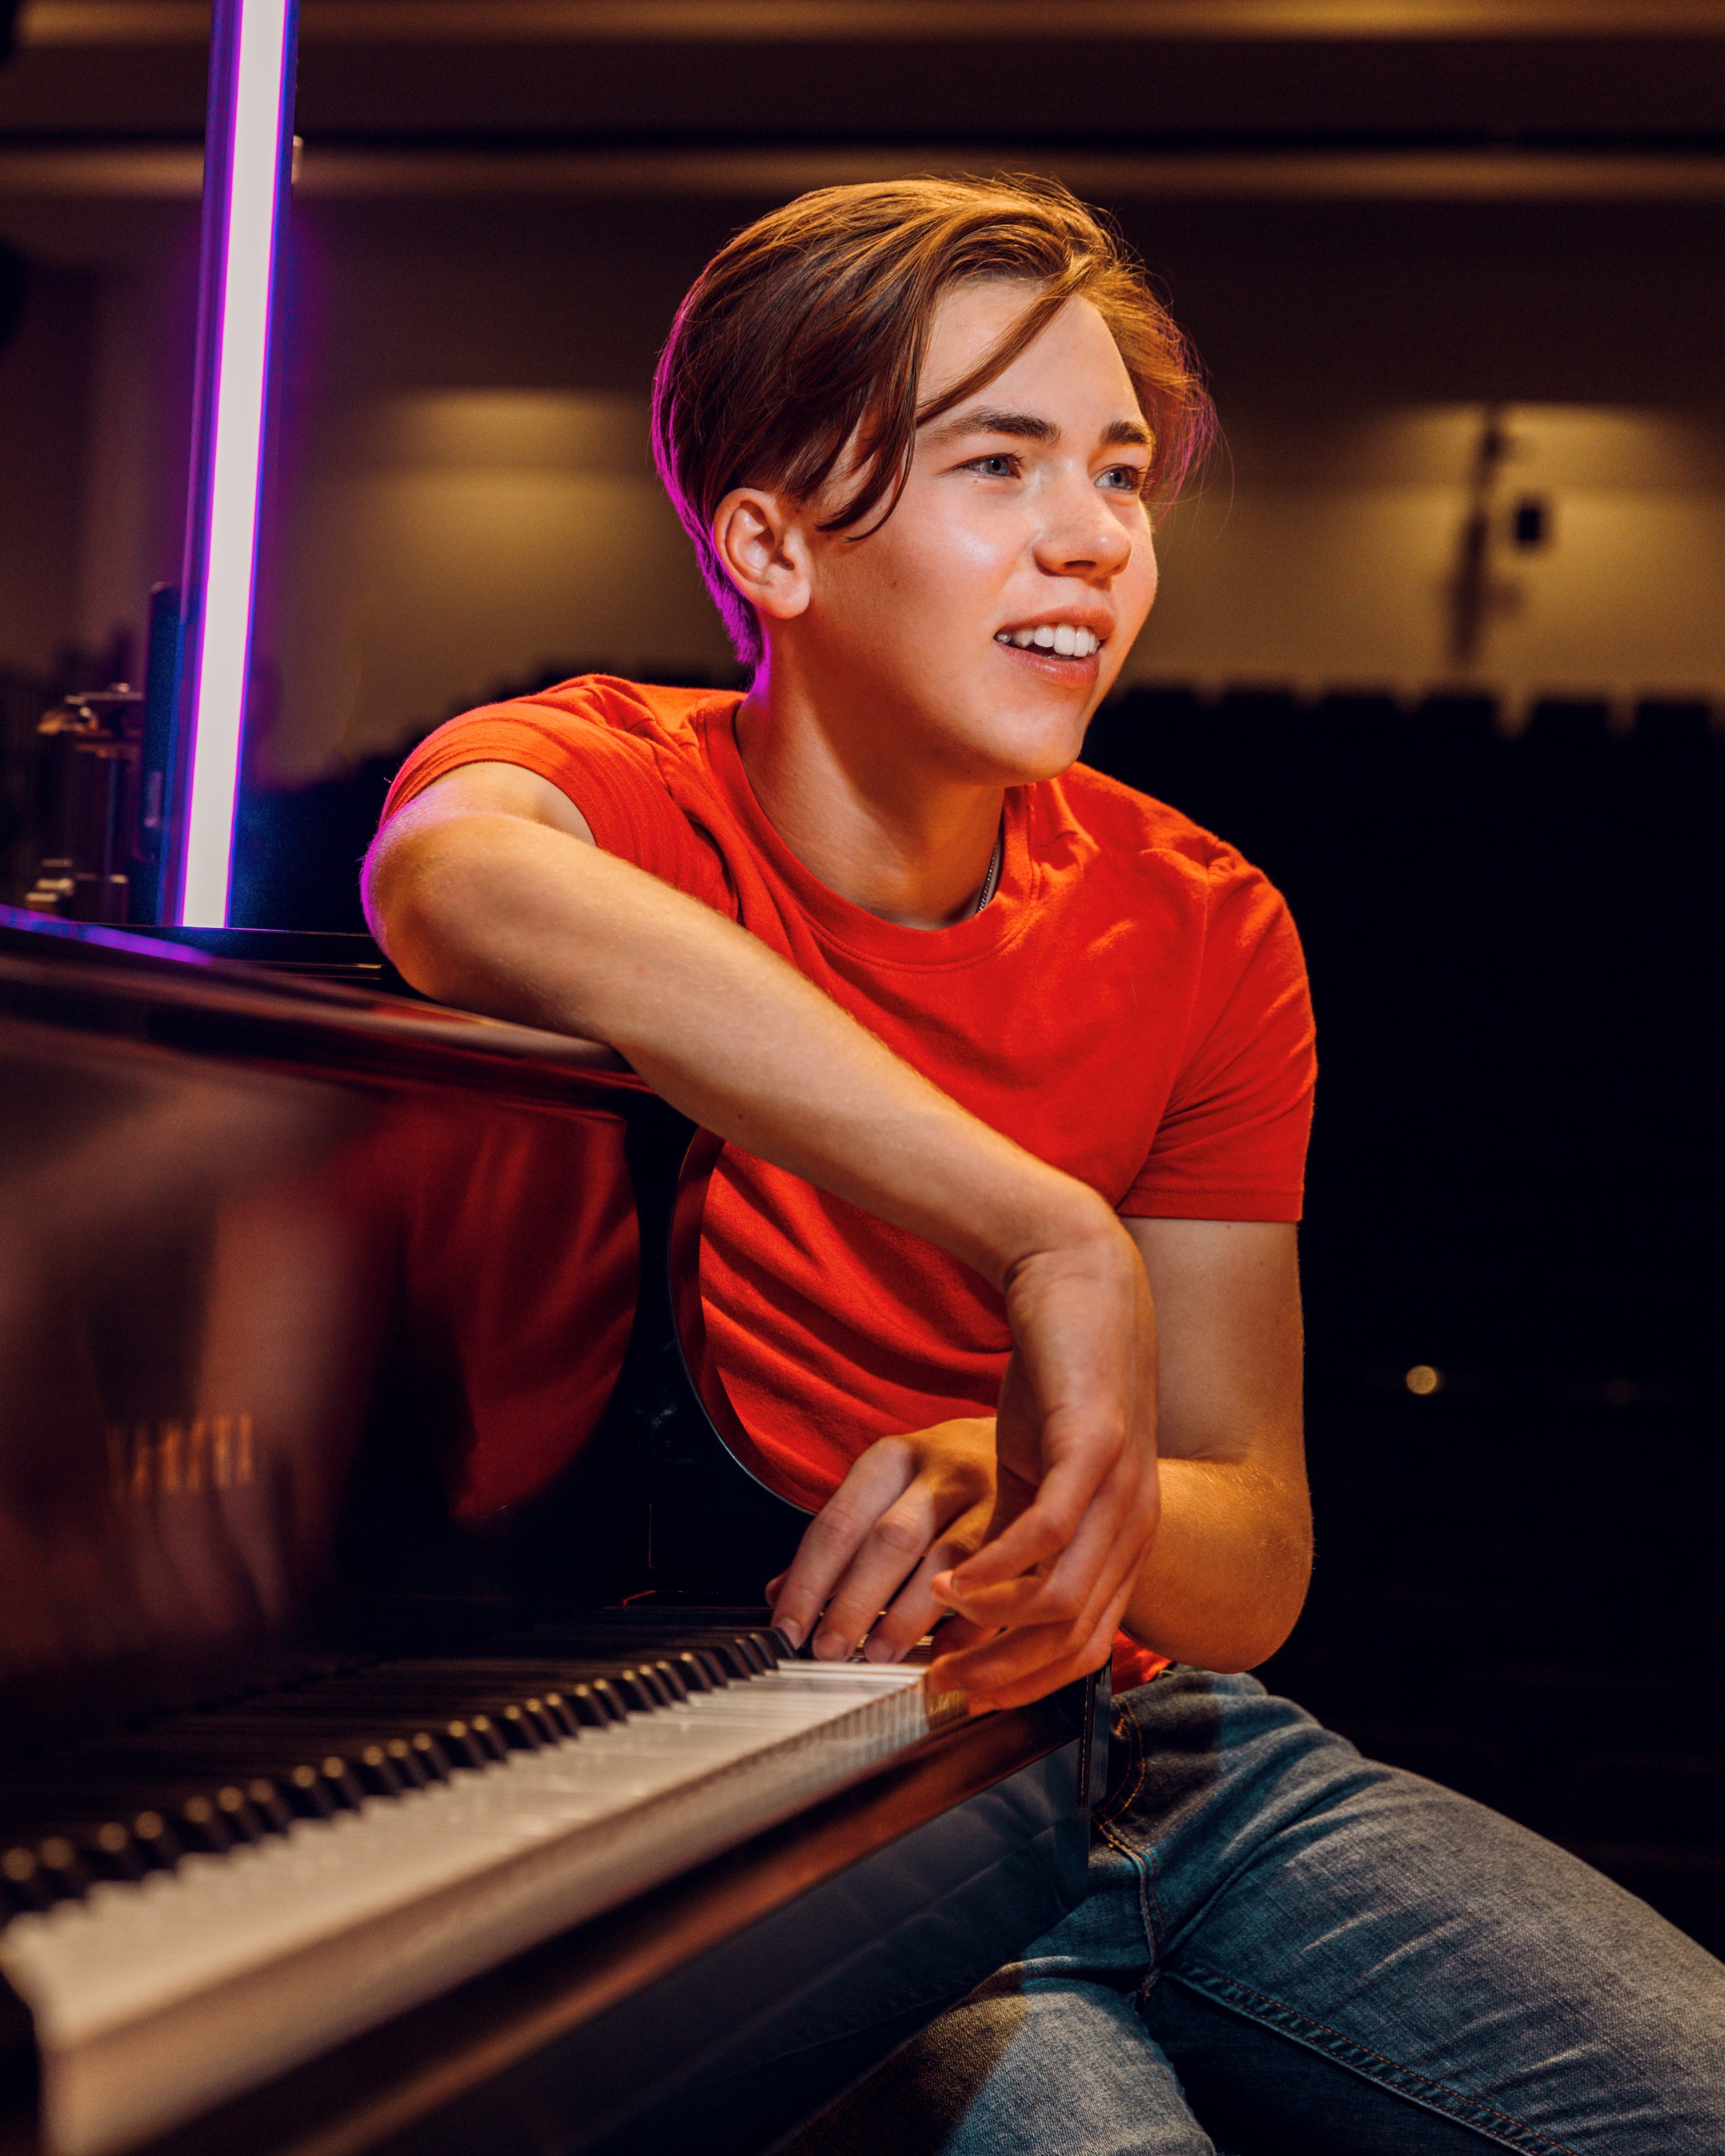 Young boy in red shirt sitting at piano